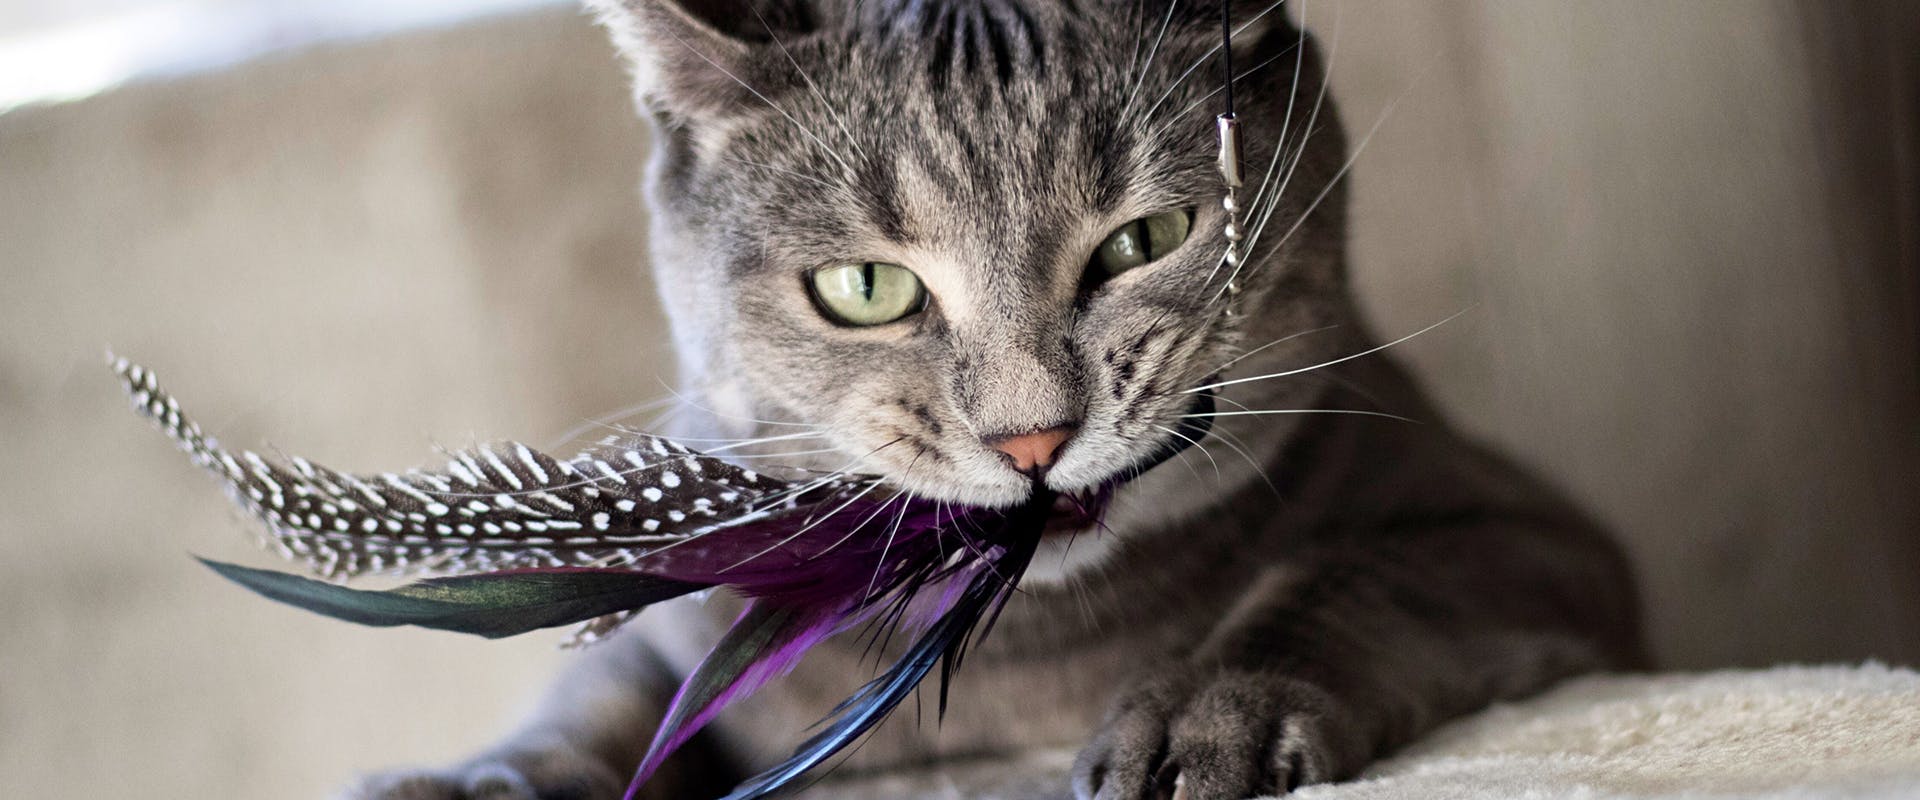 A cat playing, a feathered toy hanging from its mouth